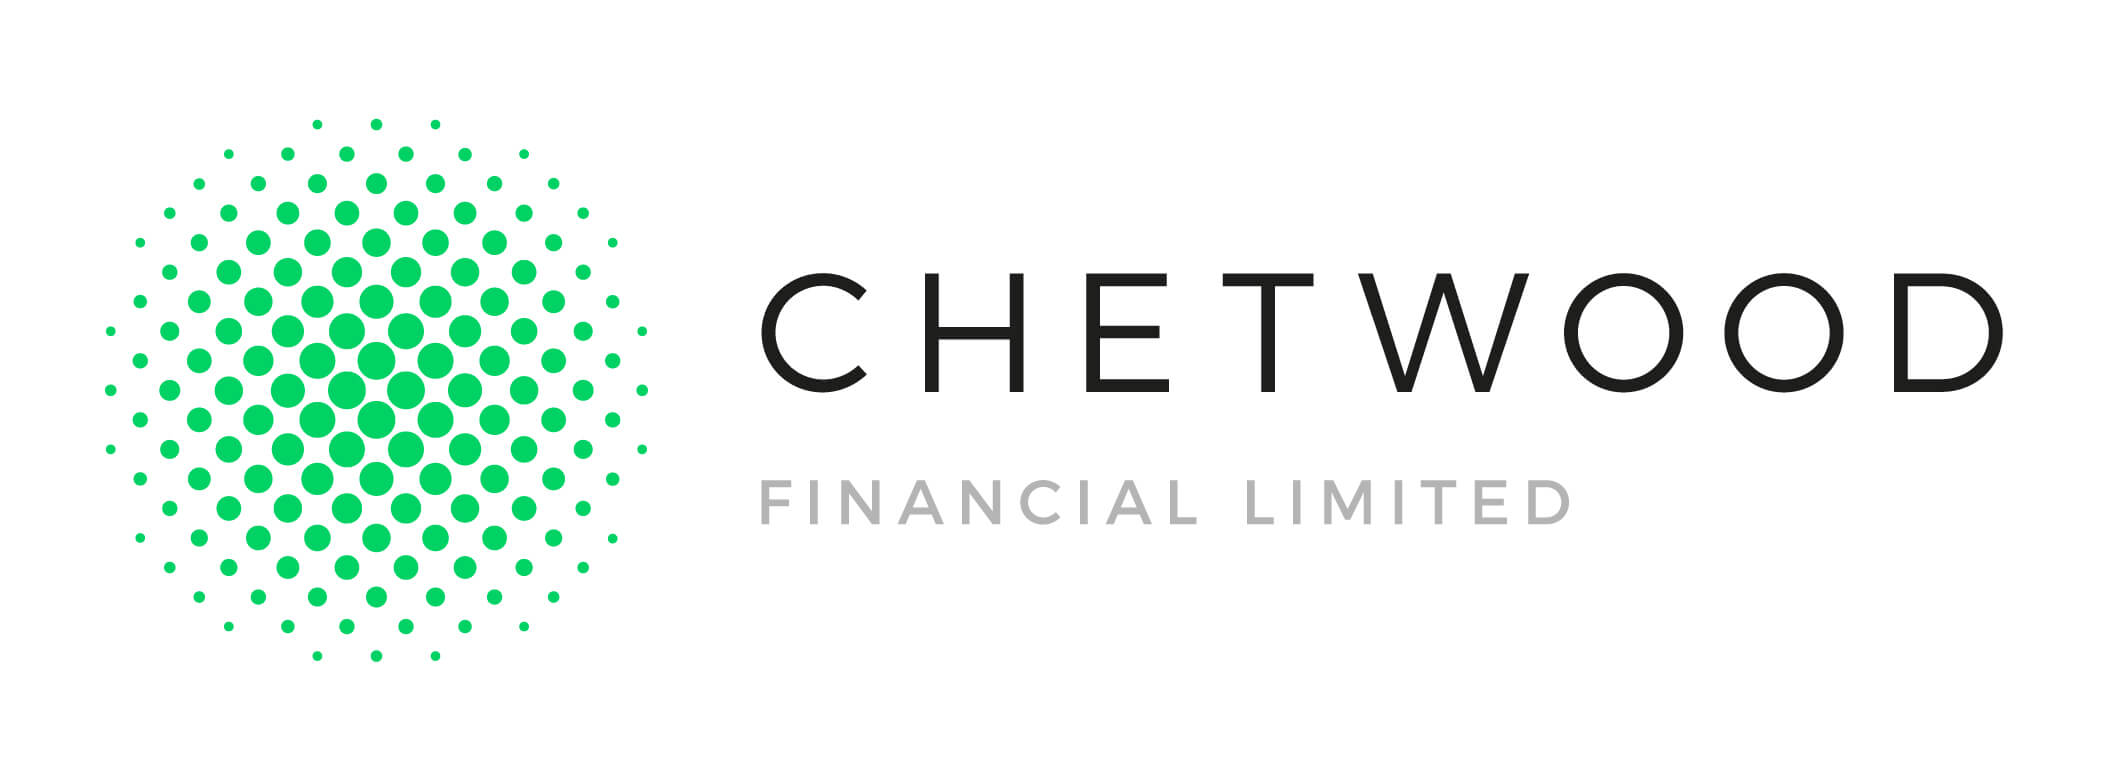 Chetwood Financial Acquires Yobota to Expand BaaS Capabilities